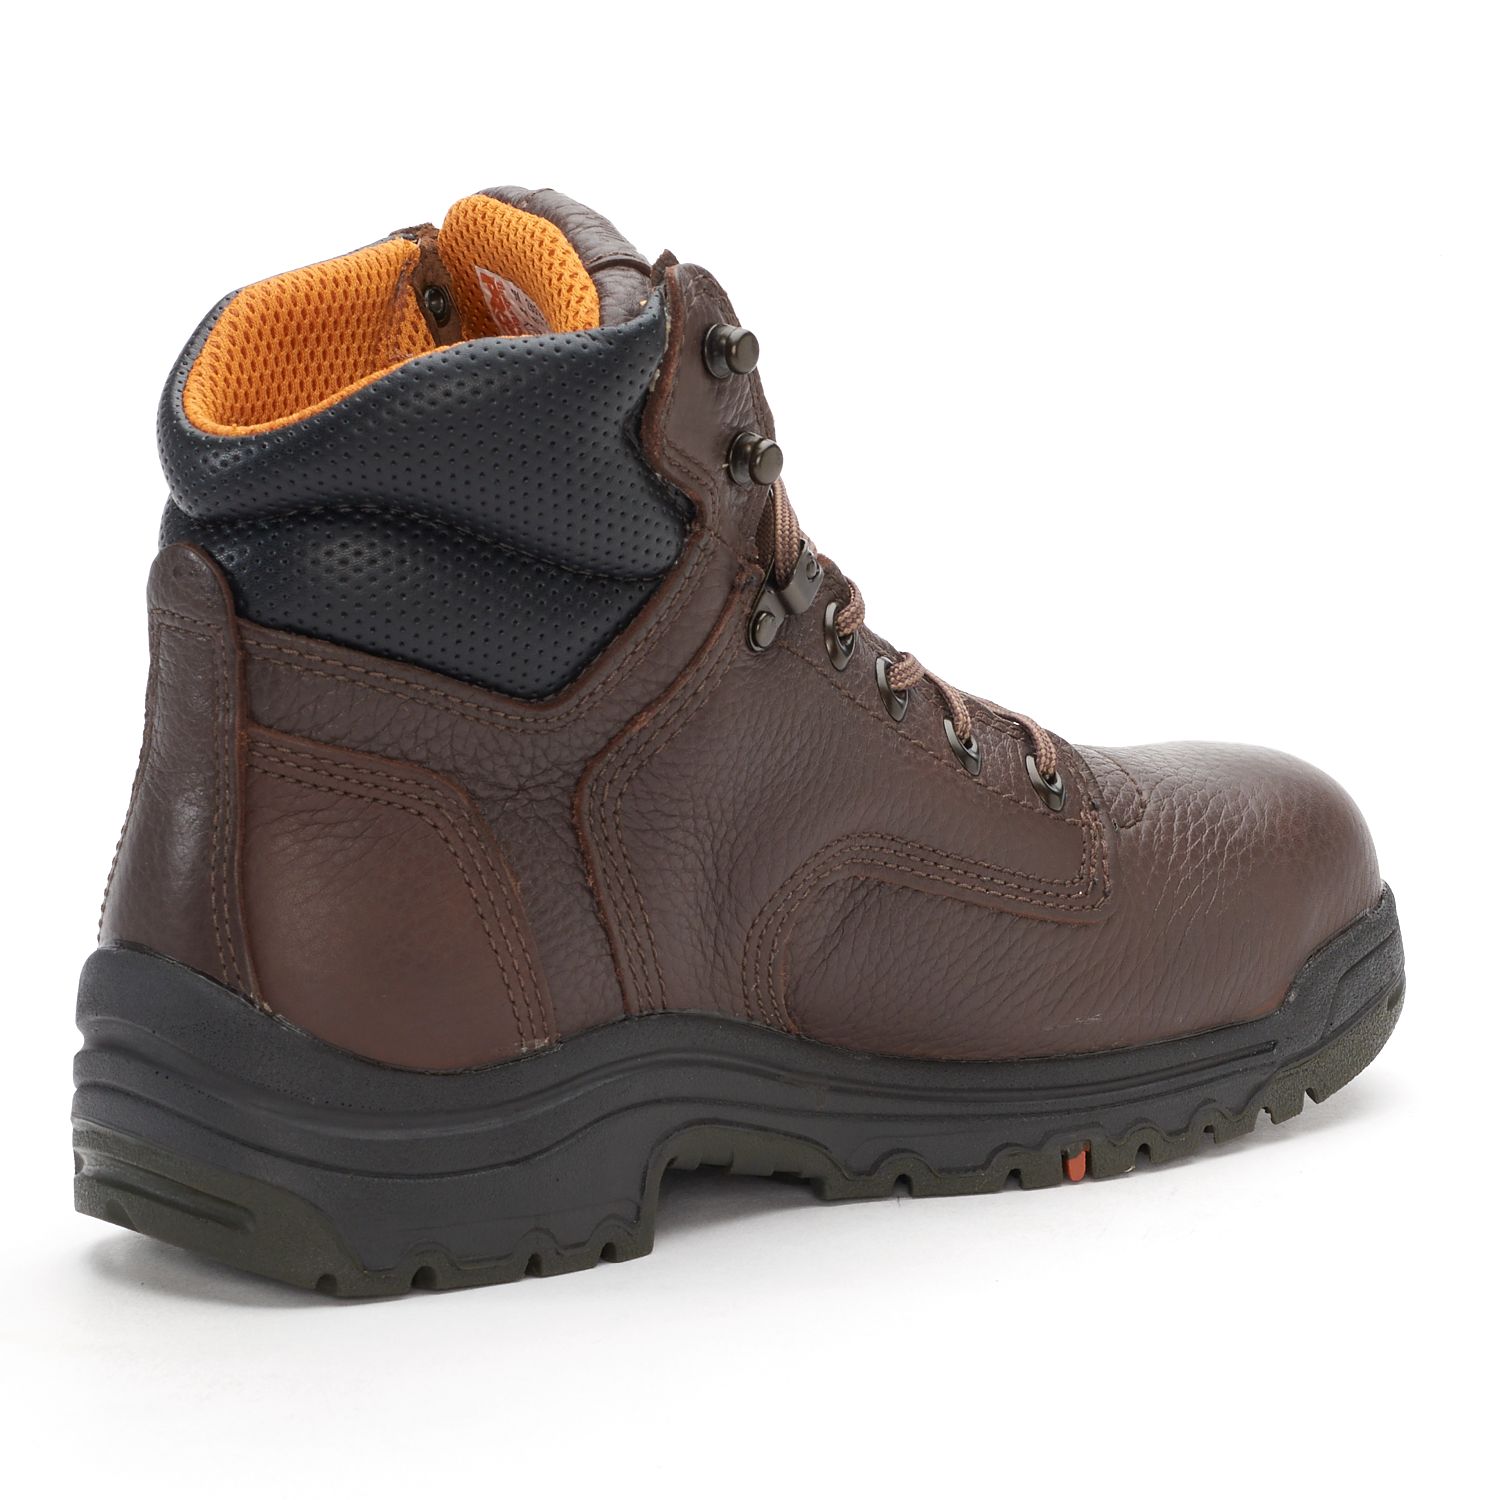 rays outdoors work boots